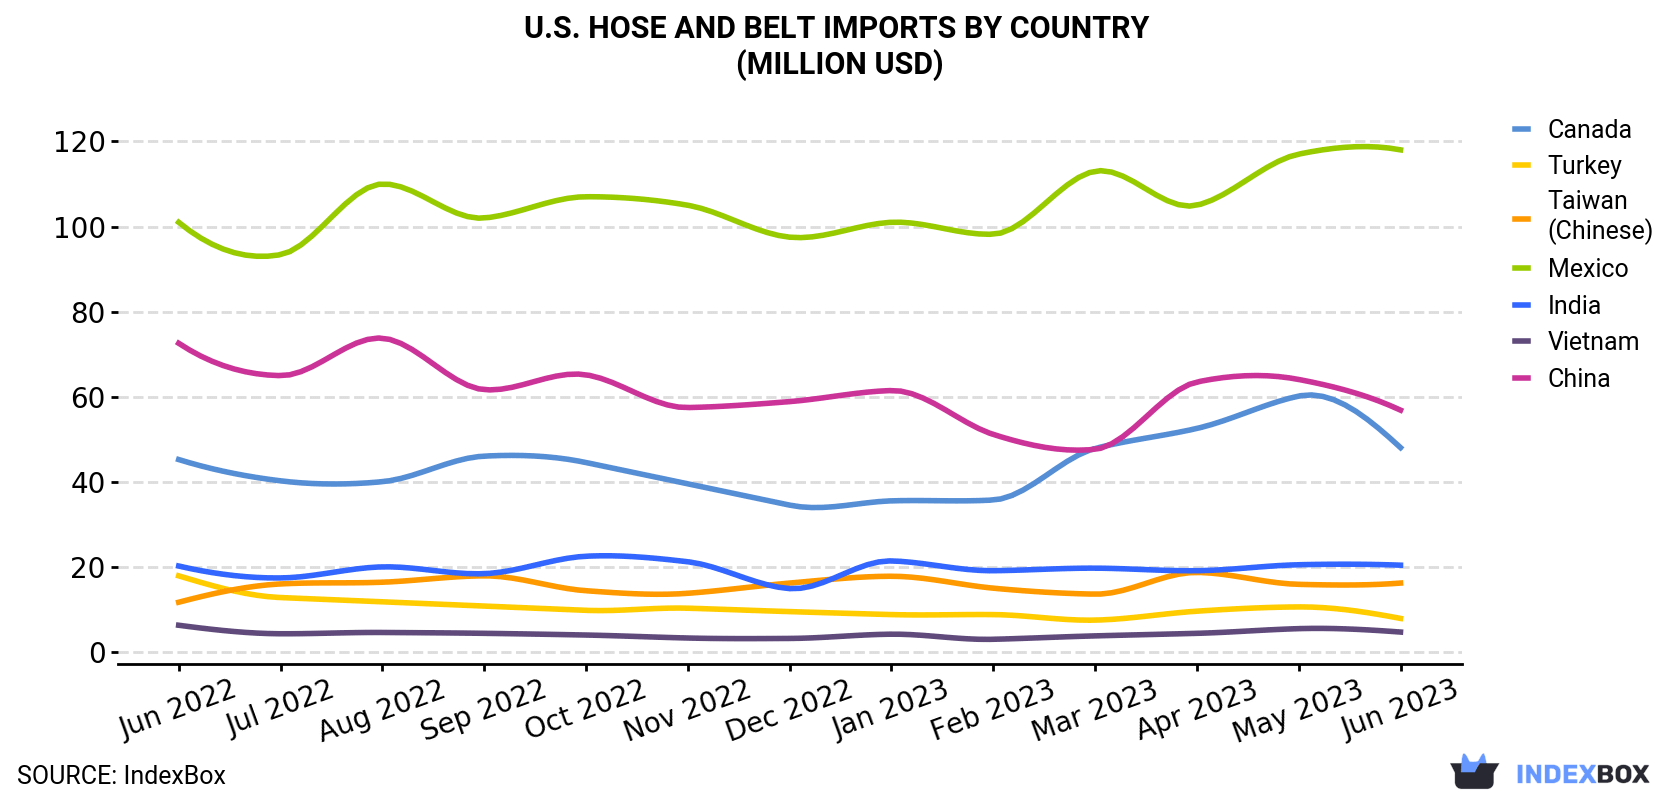 U.S. Hose And Belt Imports By Country (Million USD)